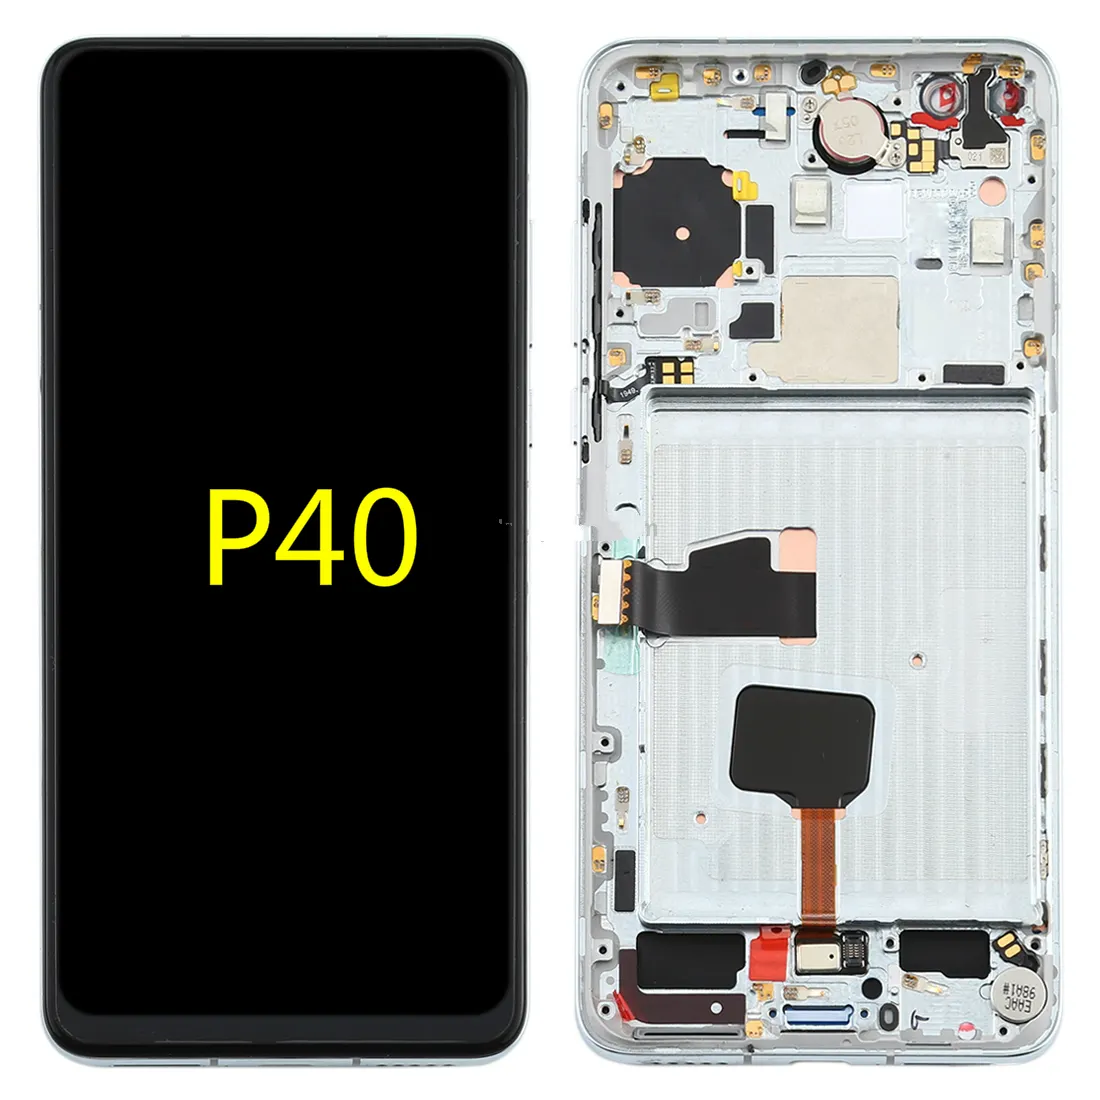 New arrived Original Pantalla para Con Detalle Huawey Pro P40 For Huawei P40 LCD Display Per Telefono With Frame